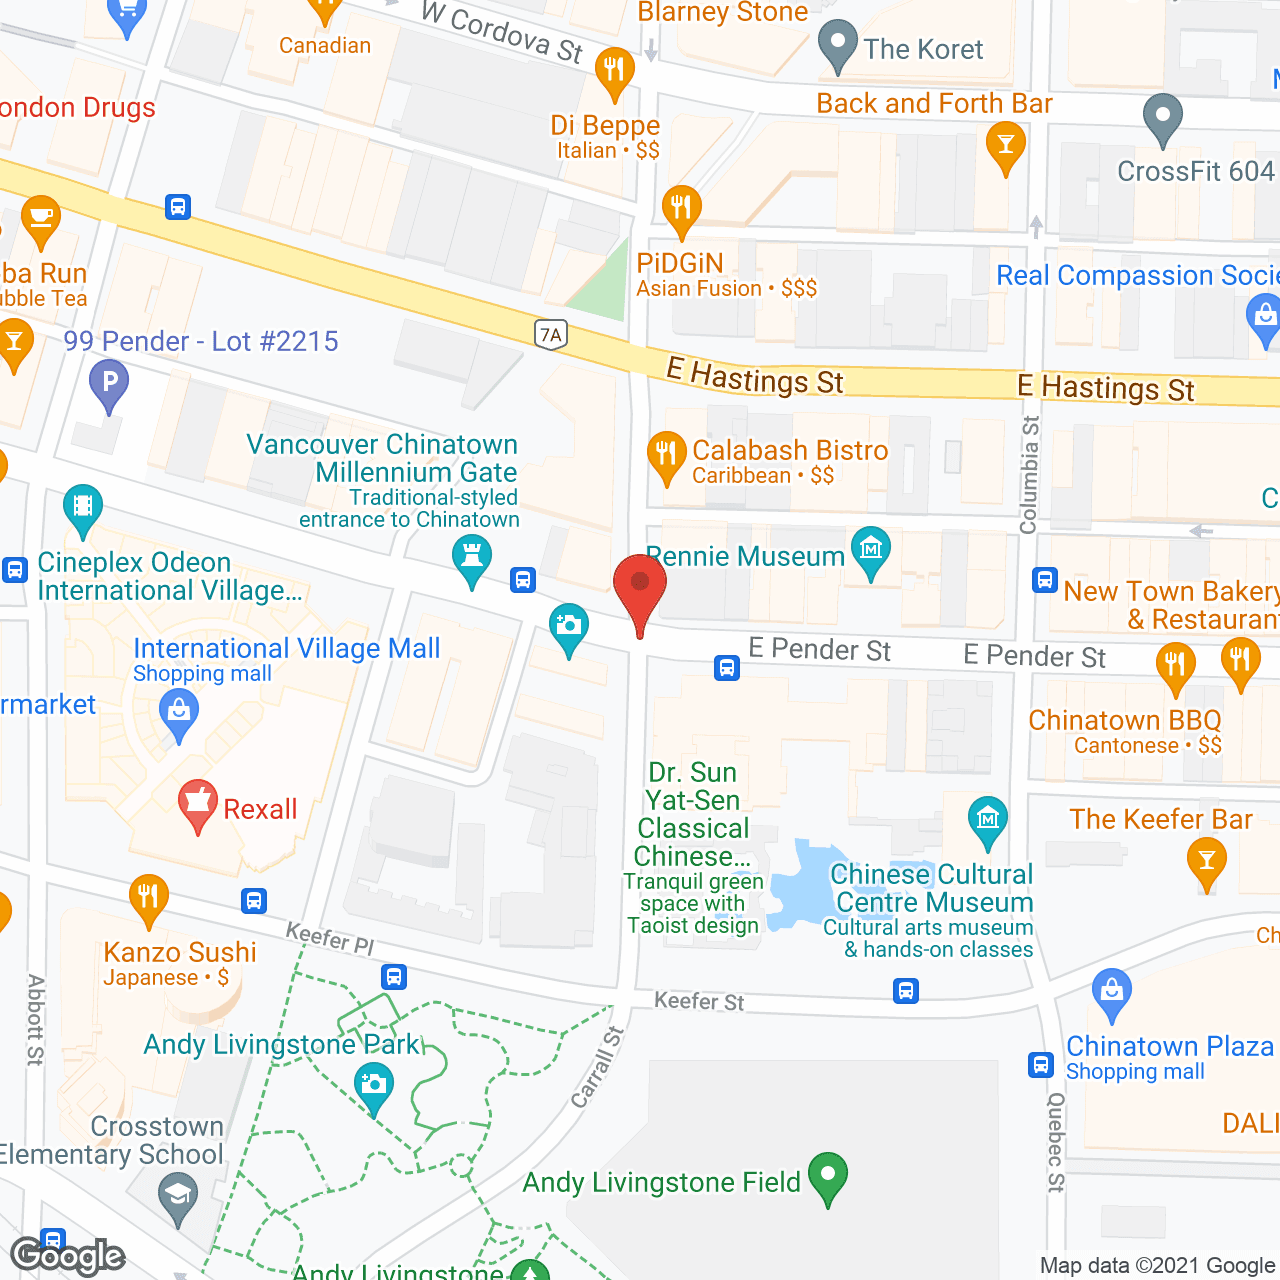 Glory Rooms in google map